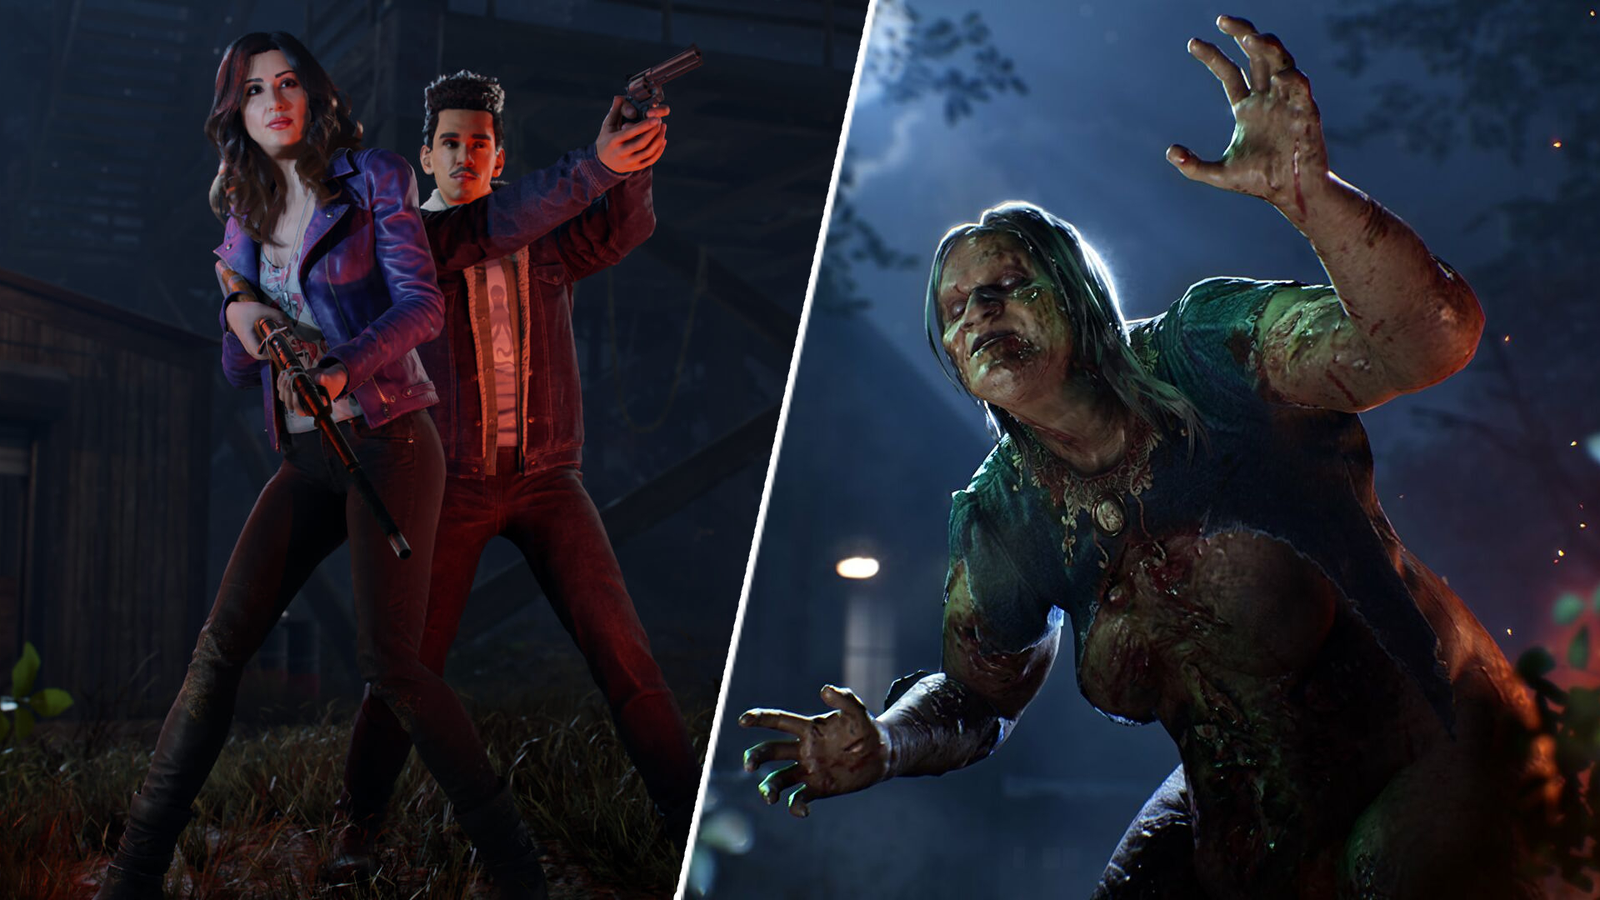 Evil Dead: The Game sells 500,000 units in under a week – perfect